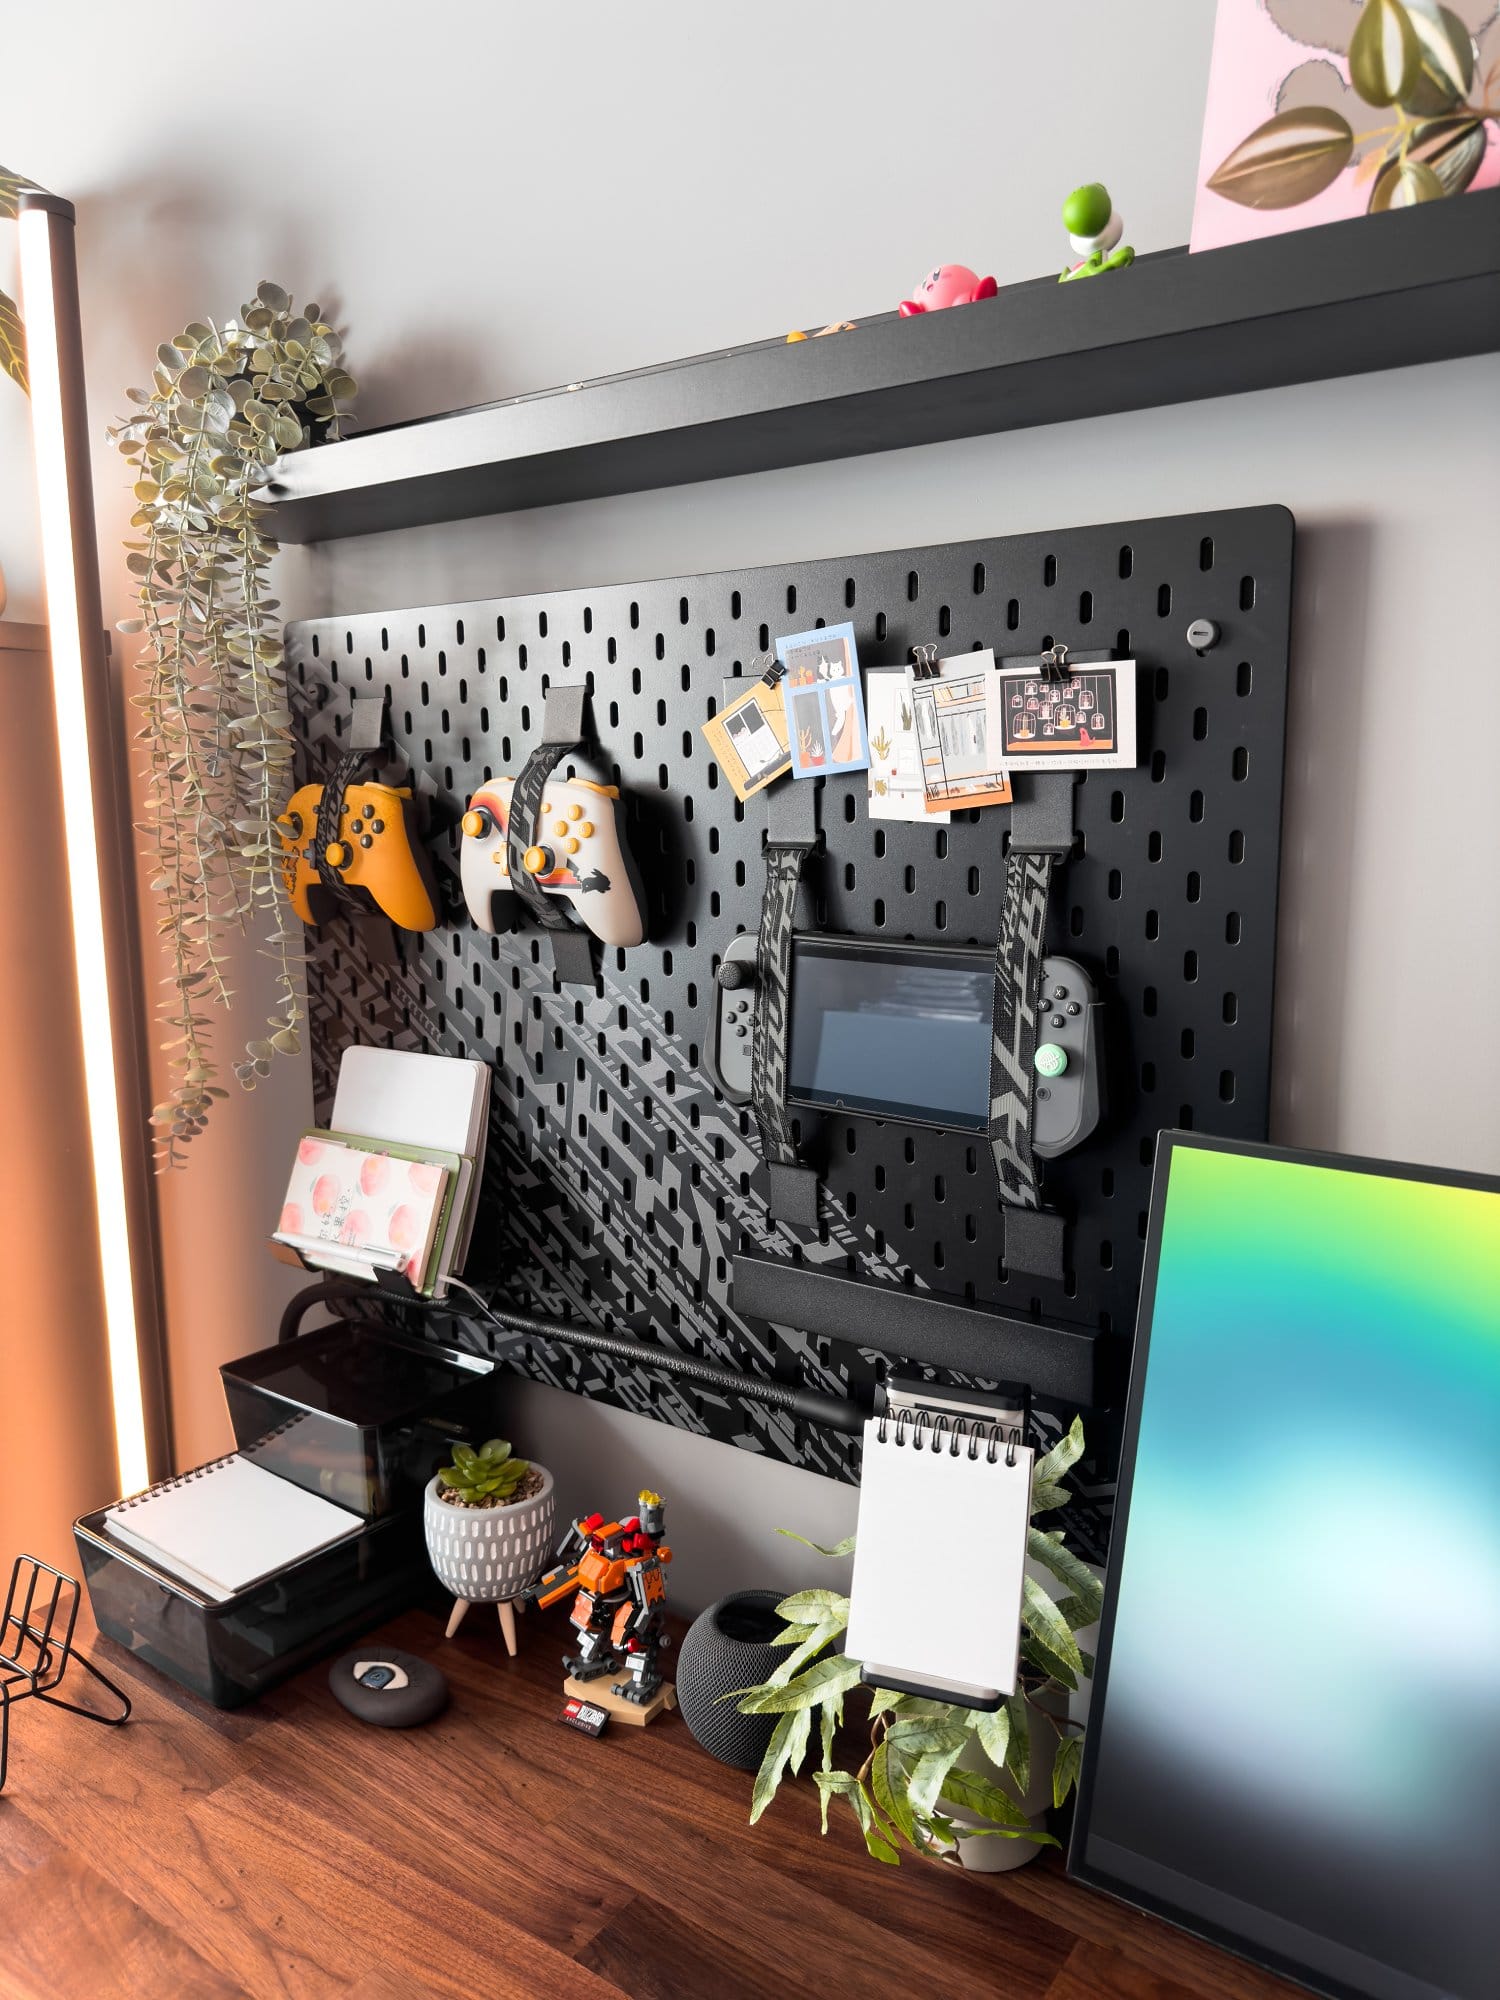 A close-up view of a workspace featuring an IKEA UPPSPEL pegboard with controllers, notes, and a Nintendo Switch, a variety of plants and decorations, and a Dell monitor partially visible, all set on a wooden IKEA KARLBY desk